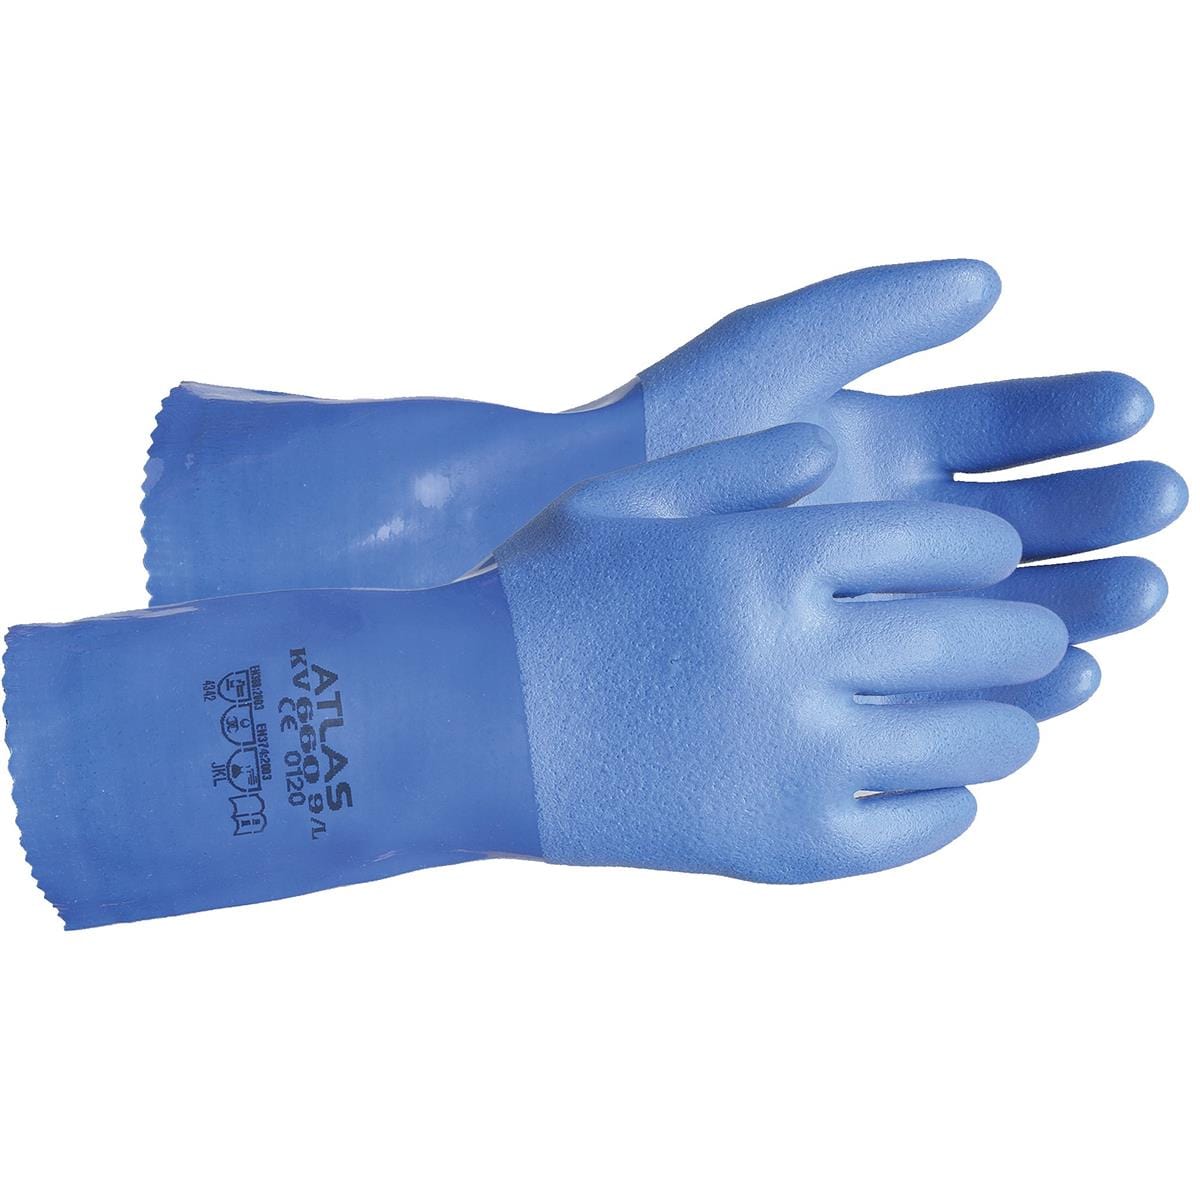 Atlas Therma-Fit Rubber Coated Work Gloves